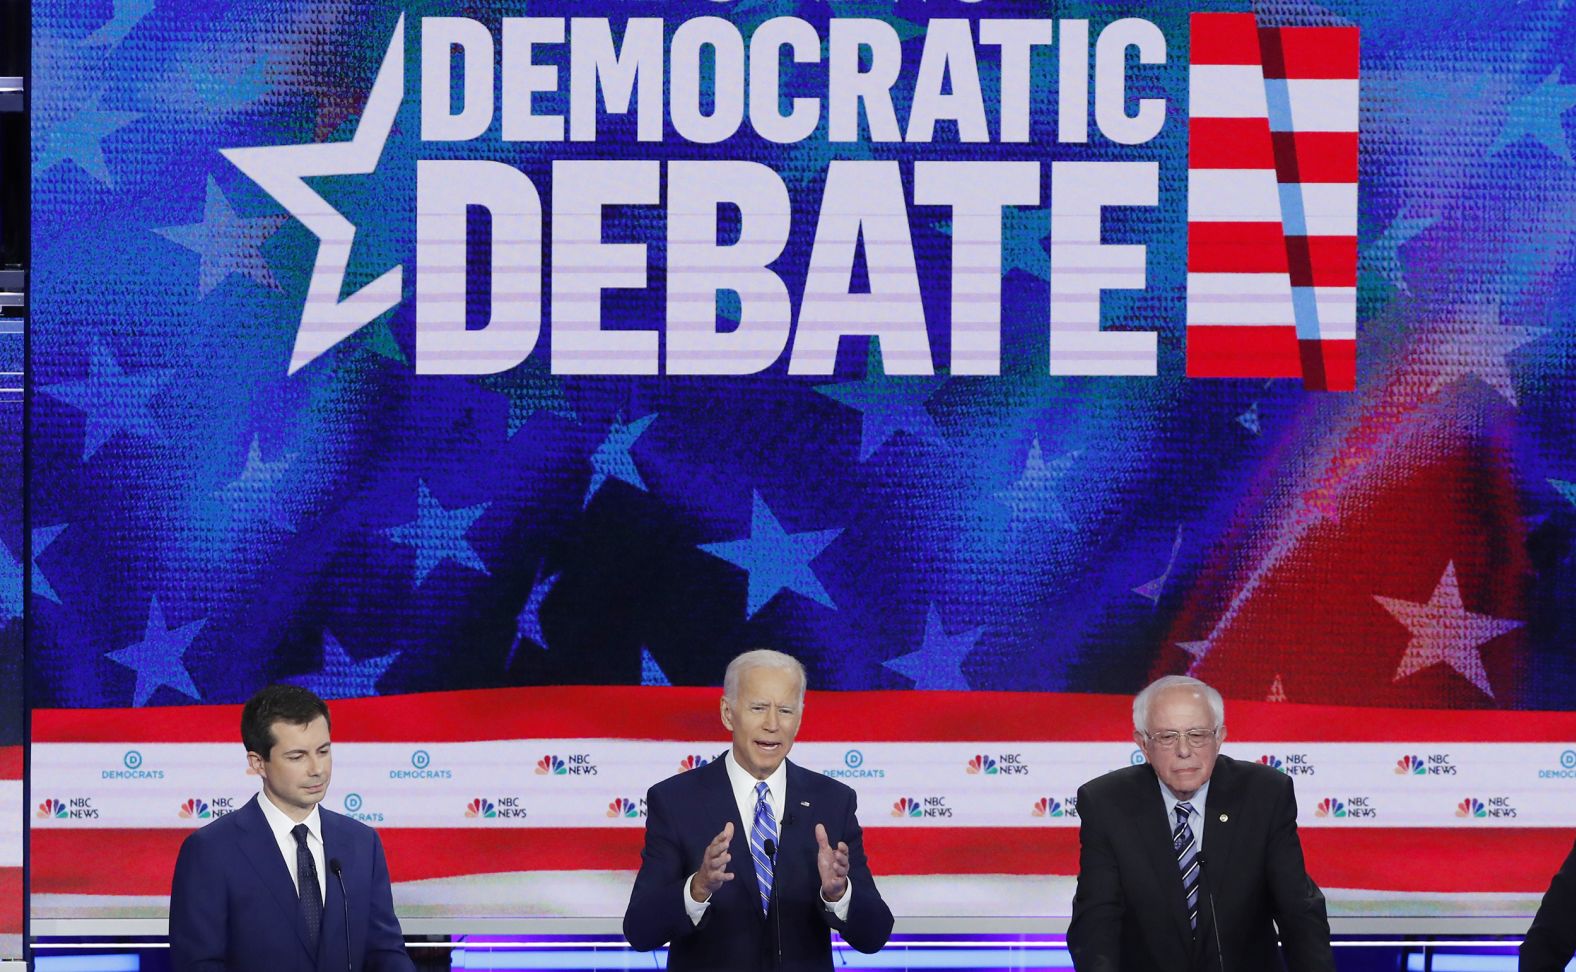 Biden, center, <a href="index.php?page=&url=https%3A%2F%2Fwww.cnn.com%2Fpolitics%2Flive-news%2Fdemocratic-debate-june-27-2019%2Fh_07c09554d7dd994336f022b7722ad23b" target="_blank">leads in national polls and in the polls of key early states</a> such as Iowa, New Hampshire, South Carolina and Nevada. And his leads are not small: He's usually up 15 to 20 points.